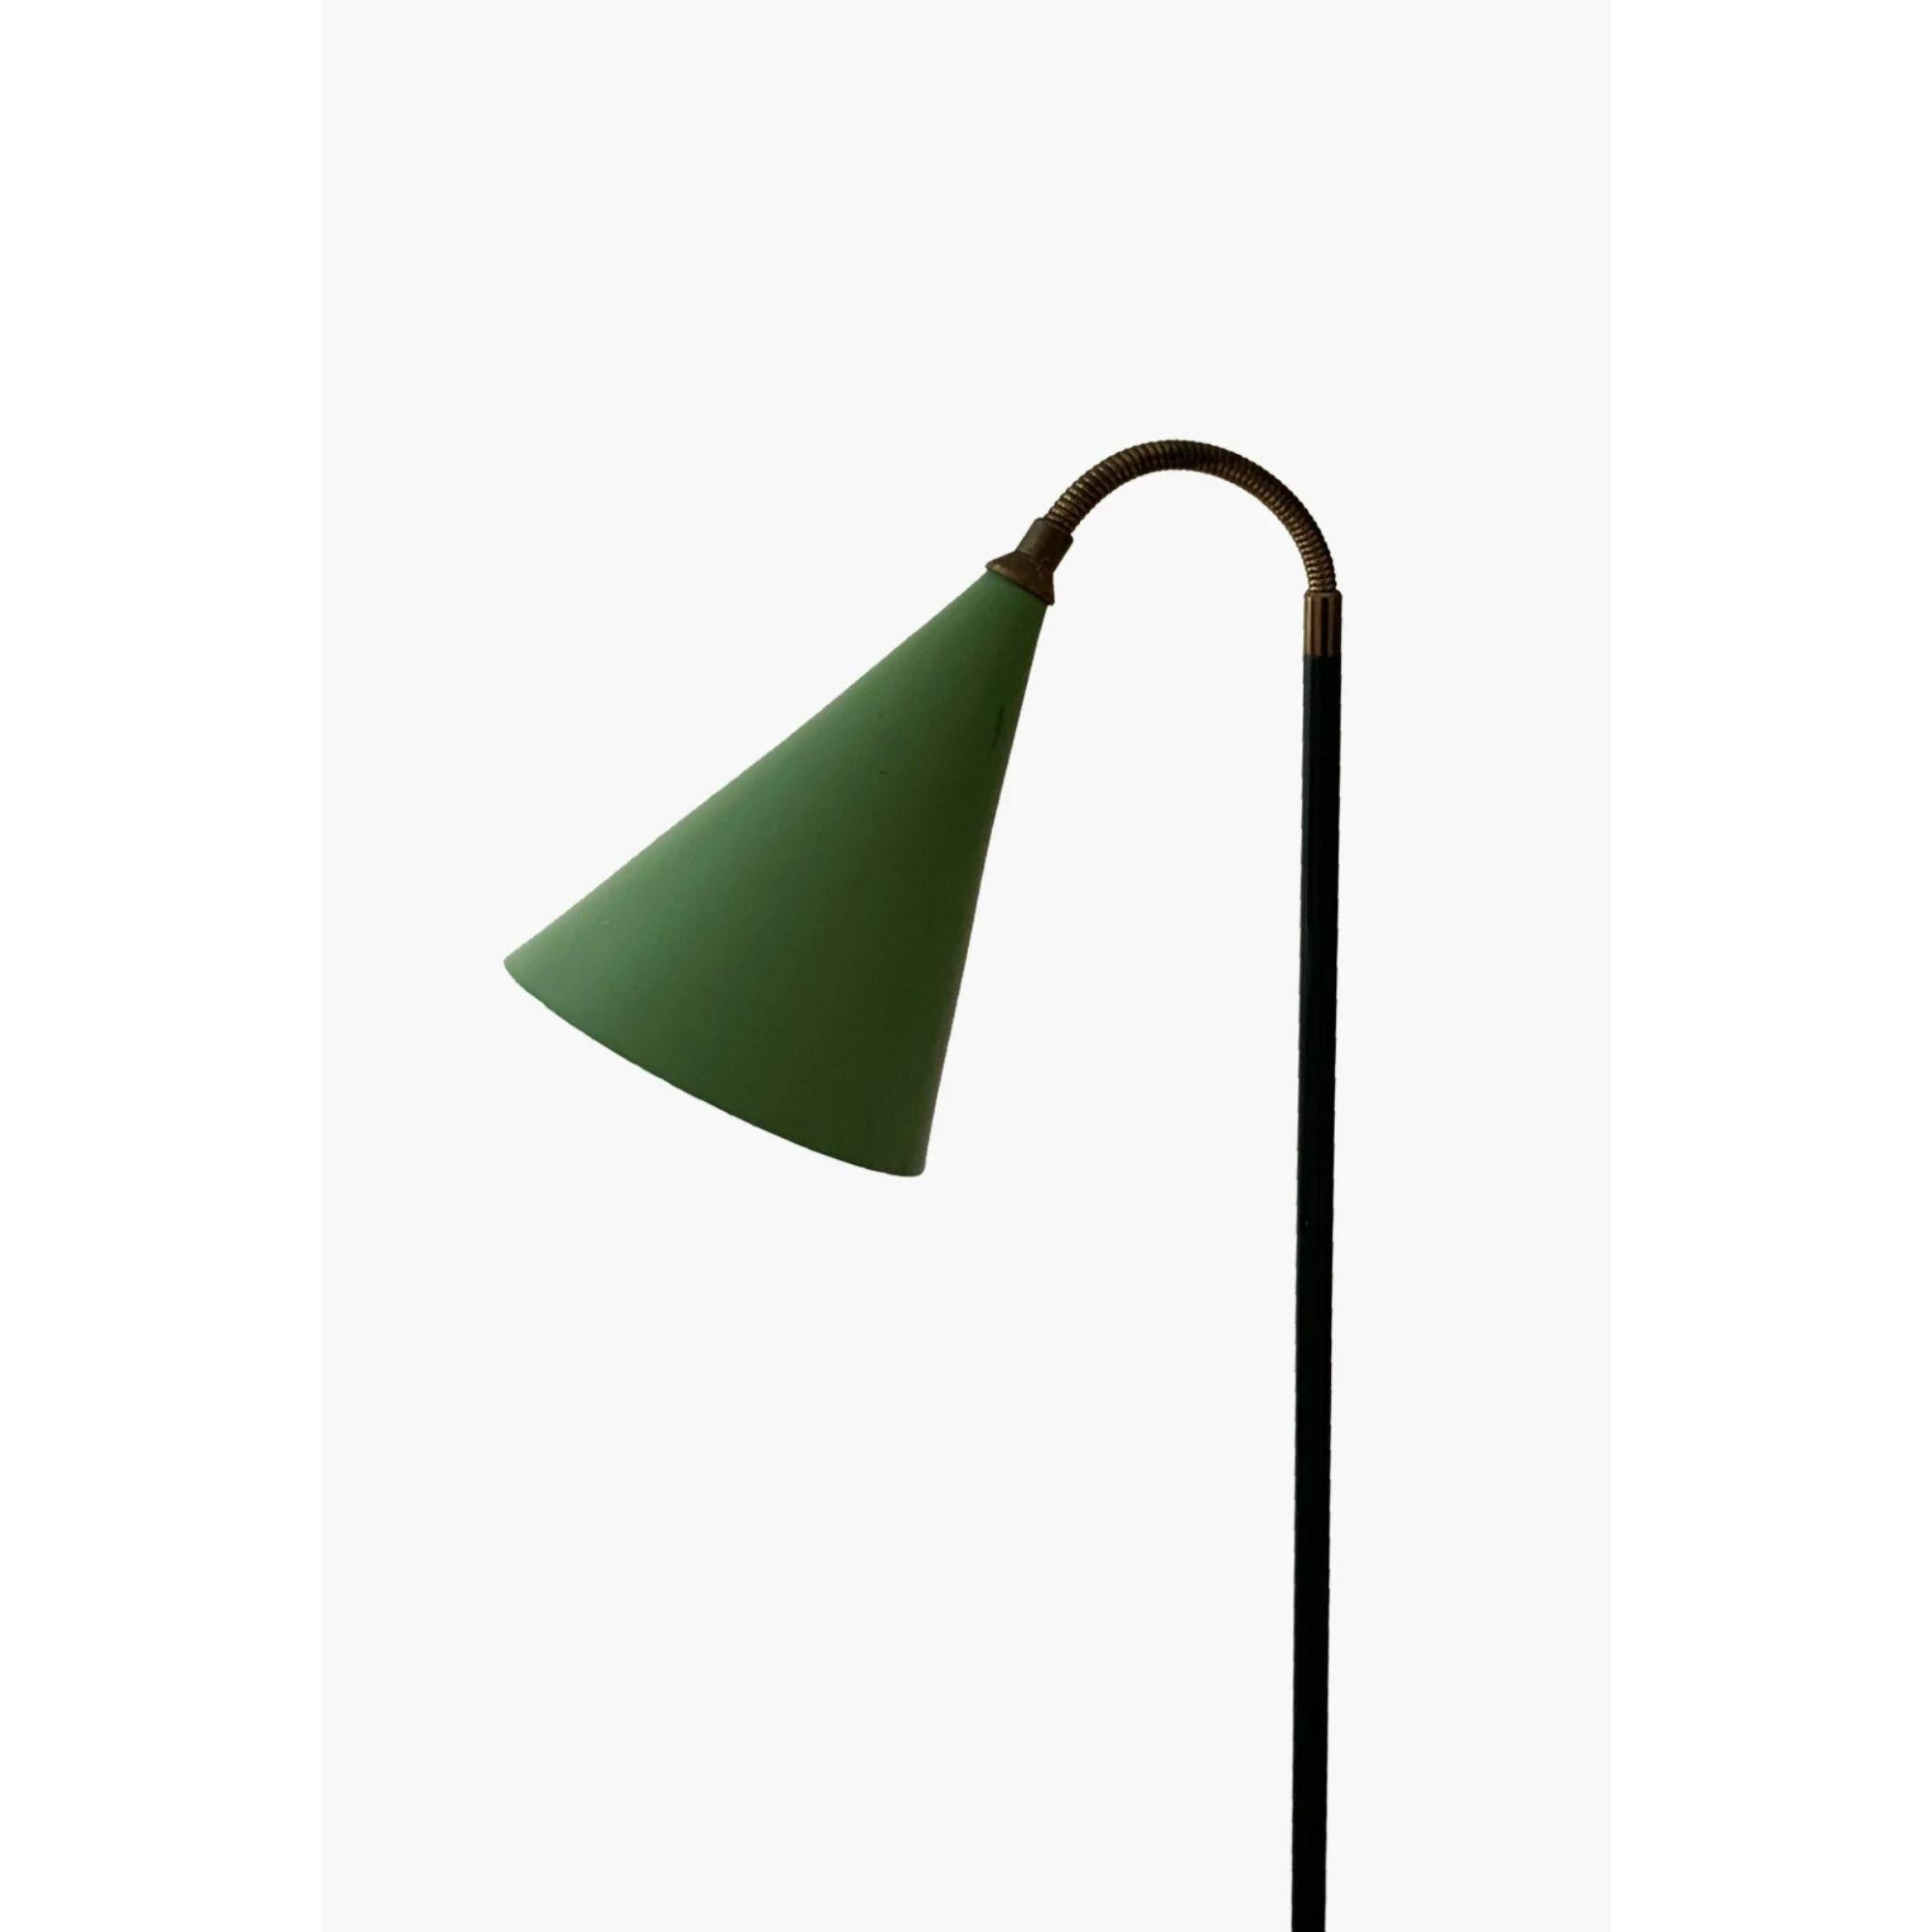 Italian floor lamp by Angelo Ostuni, 1950s.

Adjustable floor lamp by Angelo Ostuni for O-Luce. With green lacquered aluminium conical shade. Mounted on a marble base. Italian, 1950s. Wired with EC fittings.

Dimensions: H 170cm.